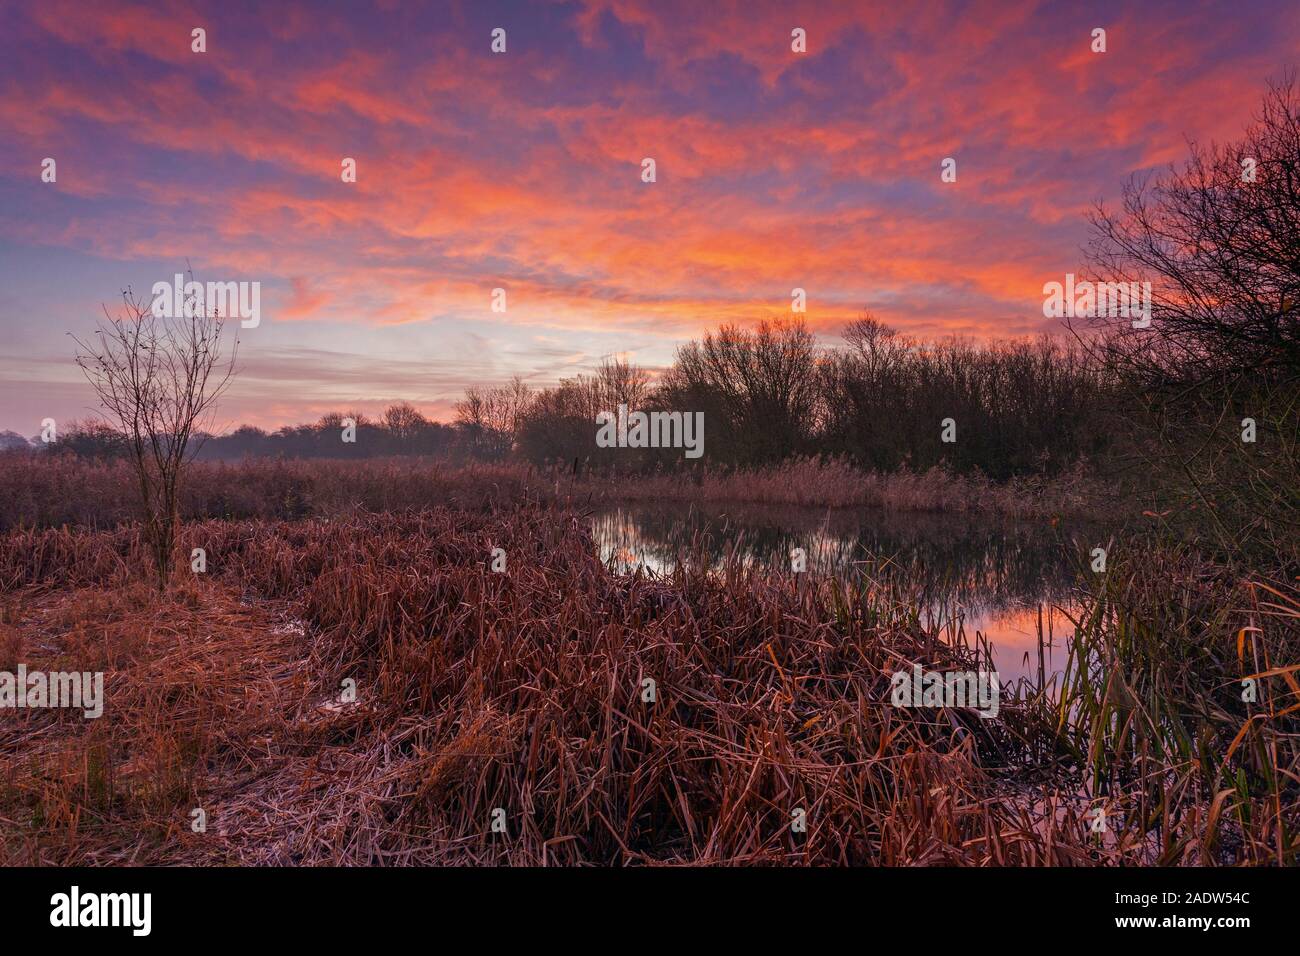 Barton-upon-Humber, North Lincolnshire, UK. 5th December 2019. UK Weather: Sunrise over a nature reserve on a Winter morning in December. Credit: LEE BEEL/Alamy Live News. Stock Photo